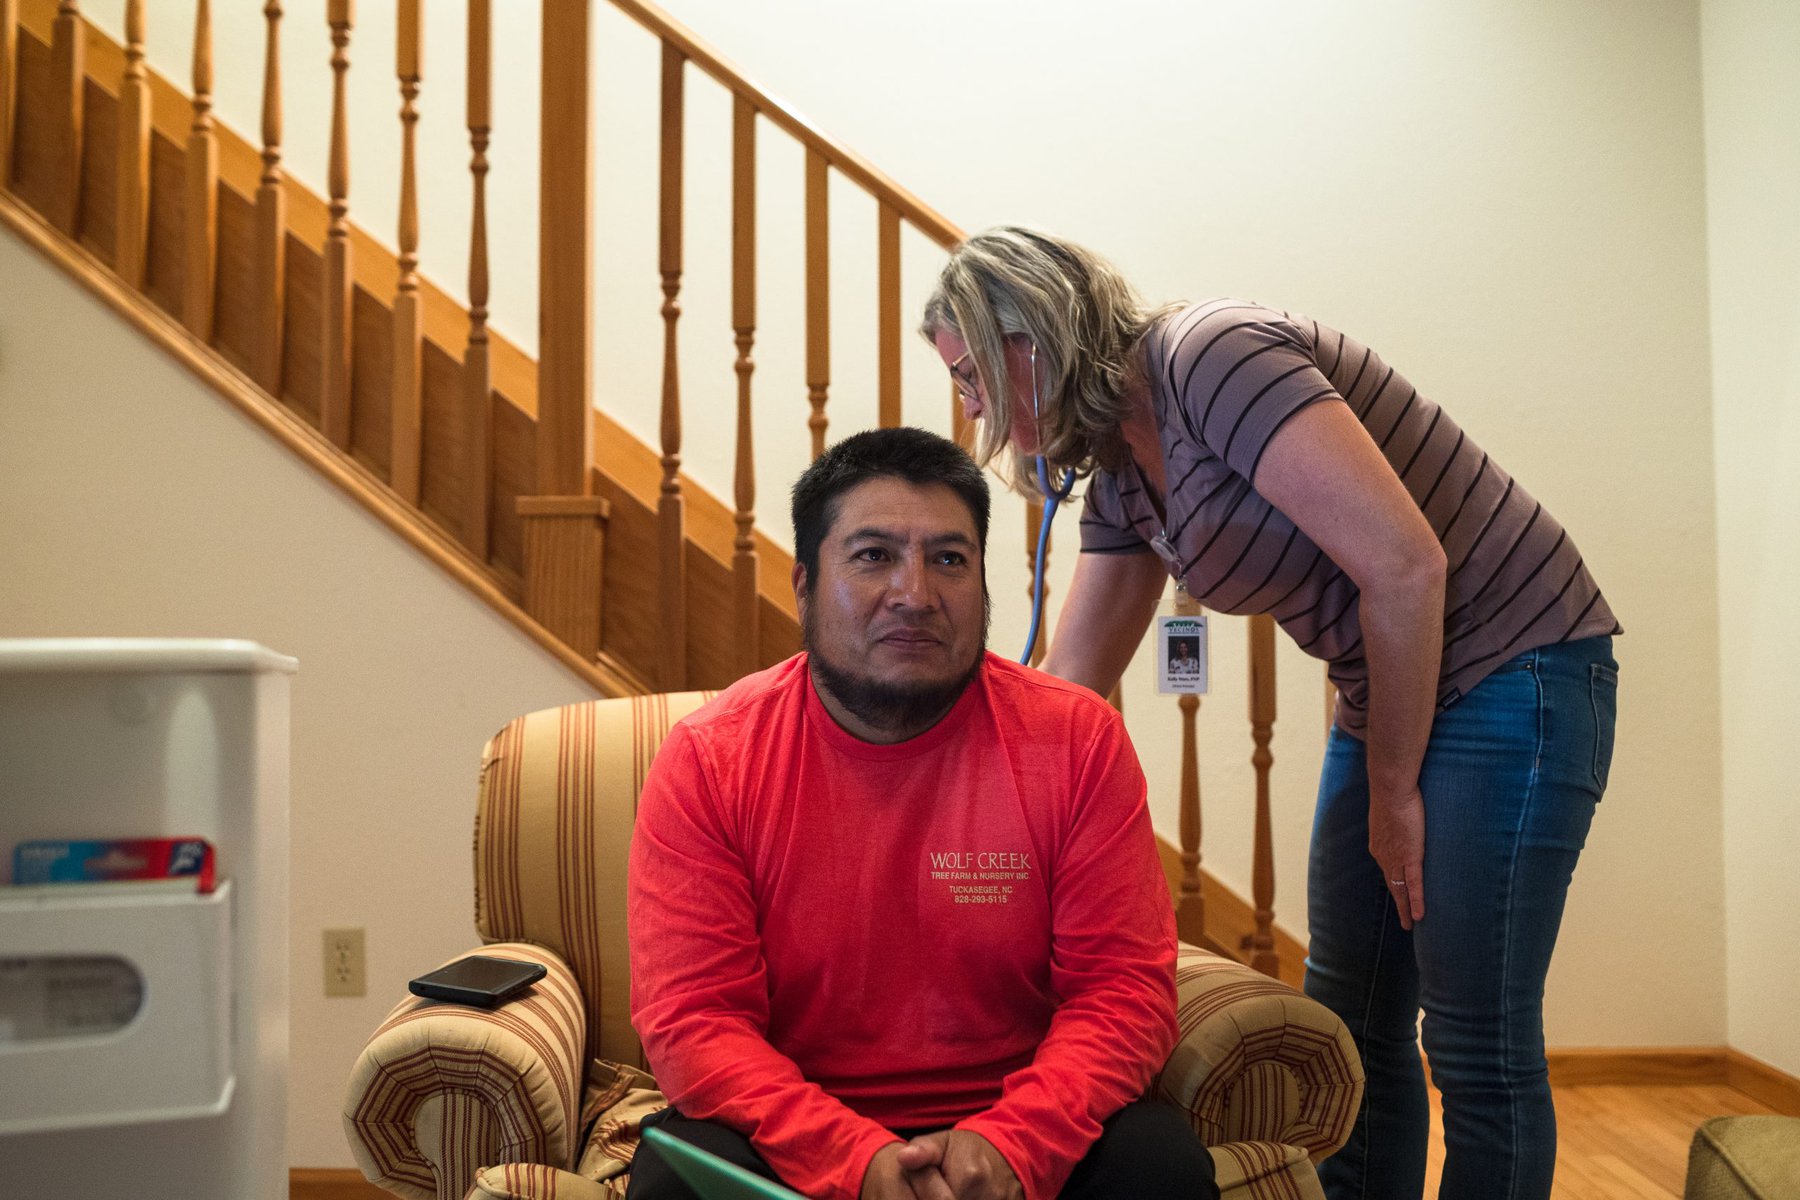 Family nurse practitioner Kelly Ware examines farmworker Andres Garcia during a farm visit by the Vecinos mobile medical clinic.